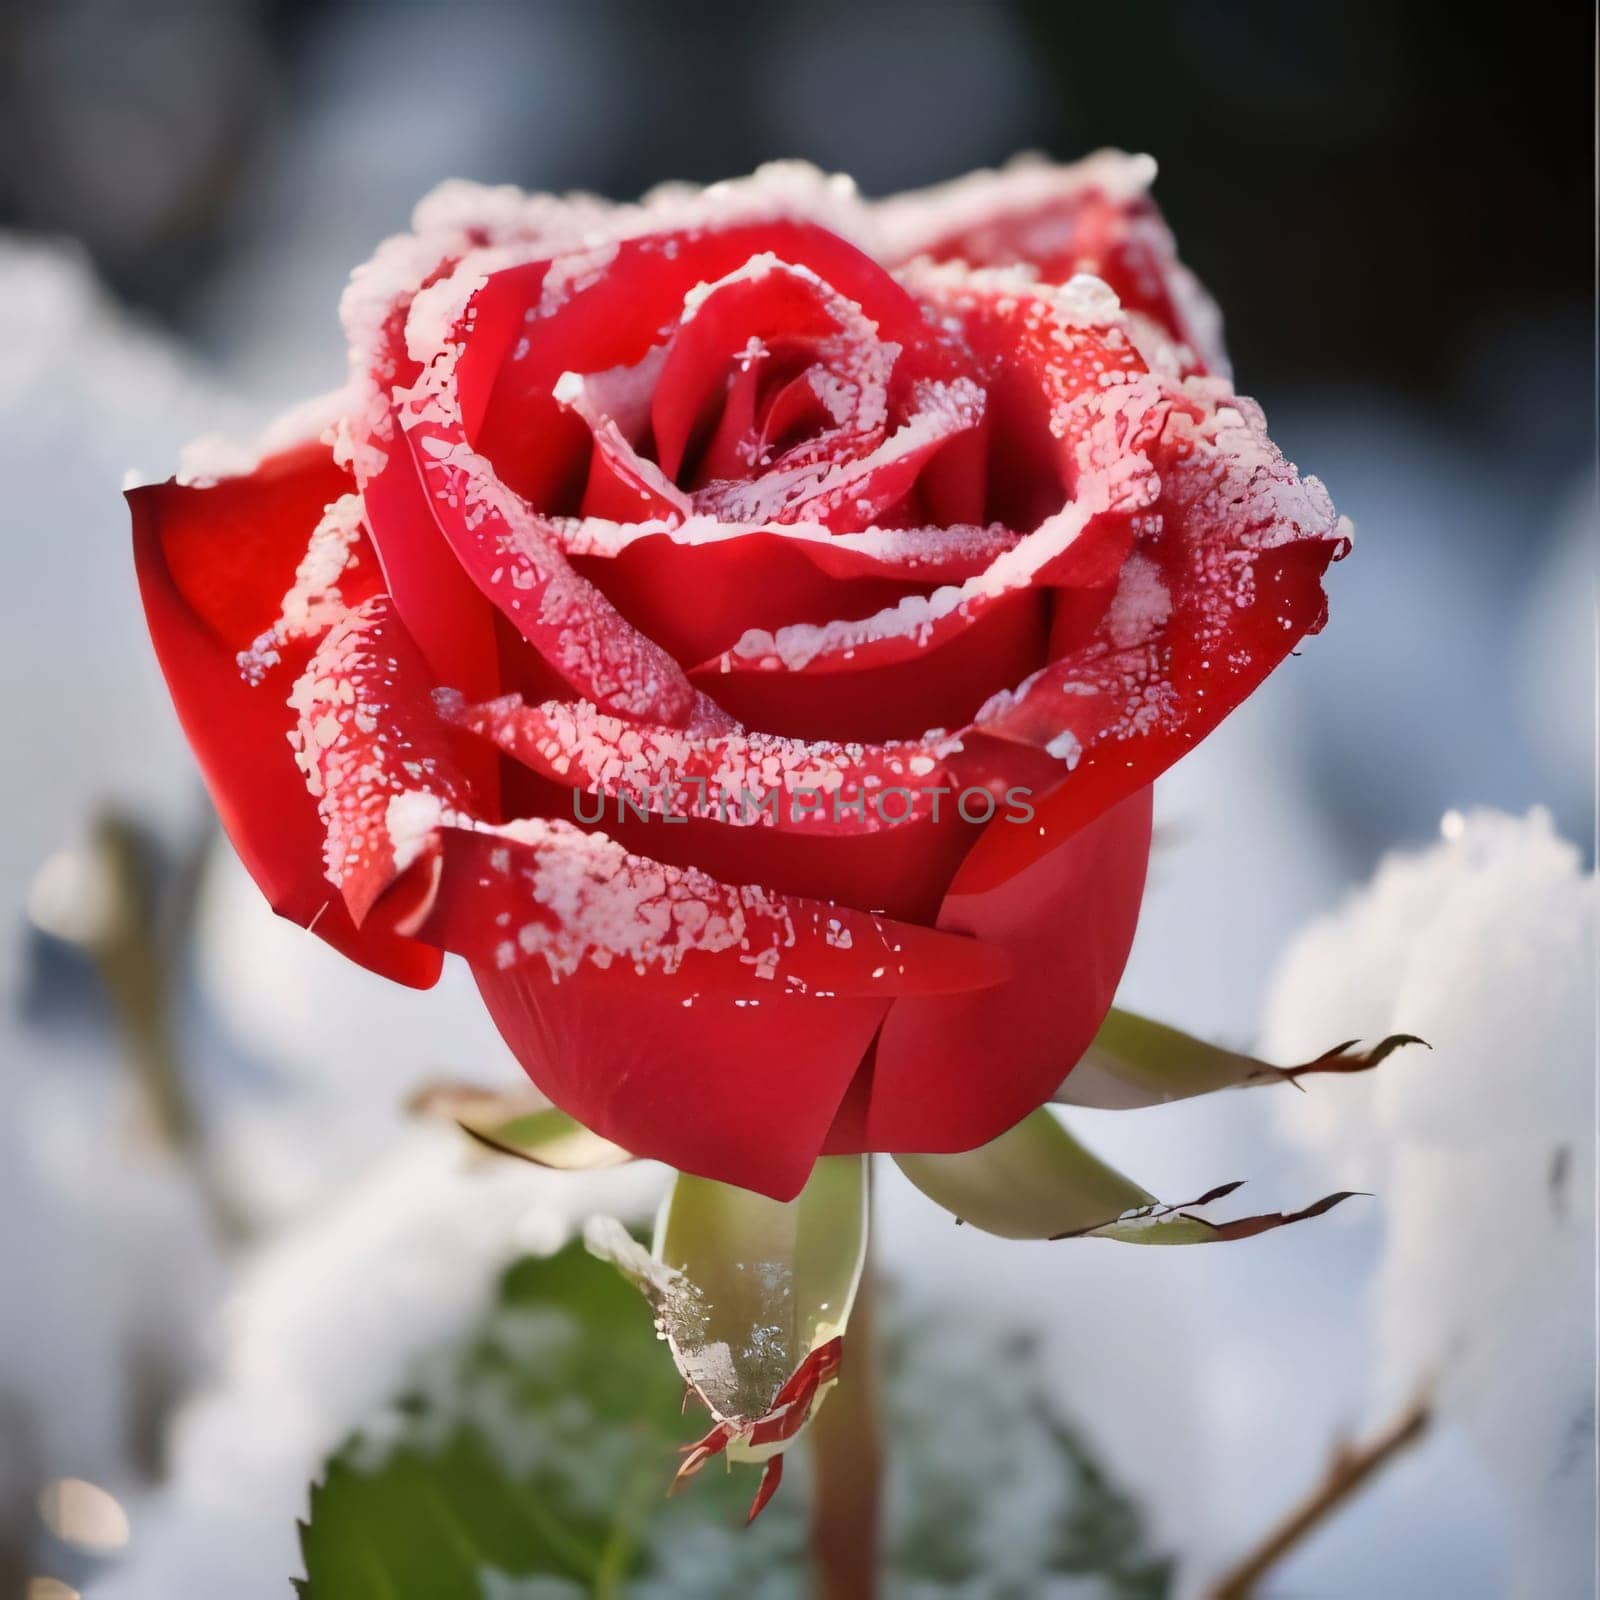 Red rose flower sprinkled with white snow, smudged background of winter. Flowering flowers, a symbol of spring, new life. A joyful time of nature waking up to life.